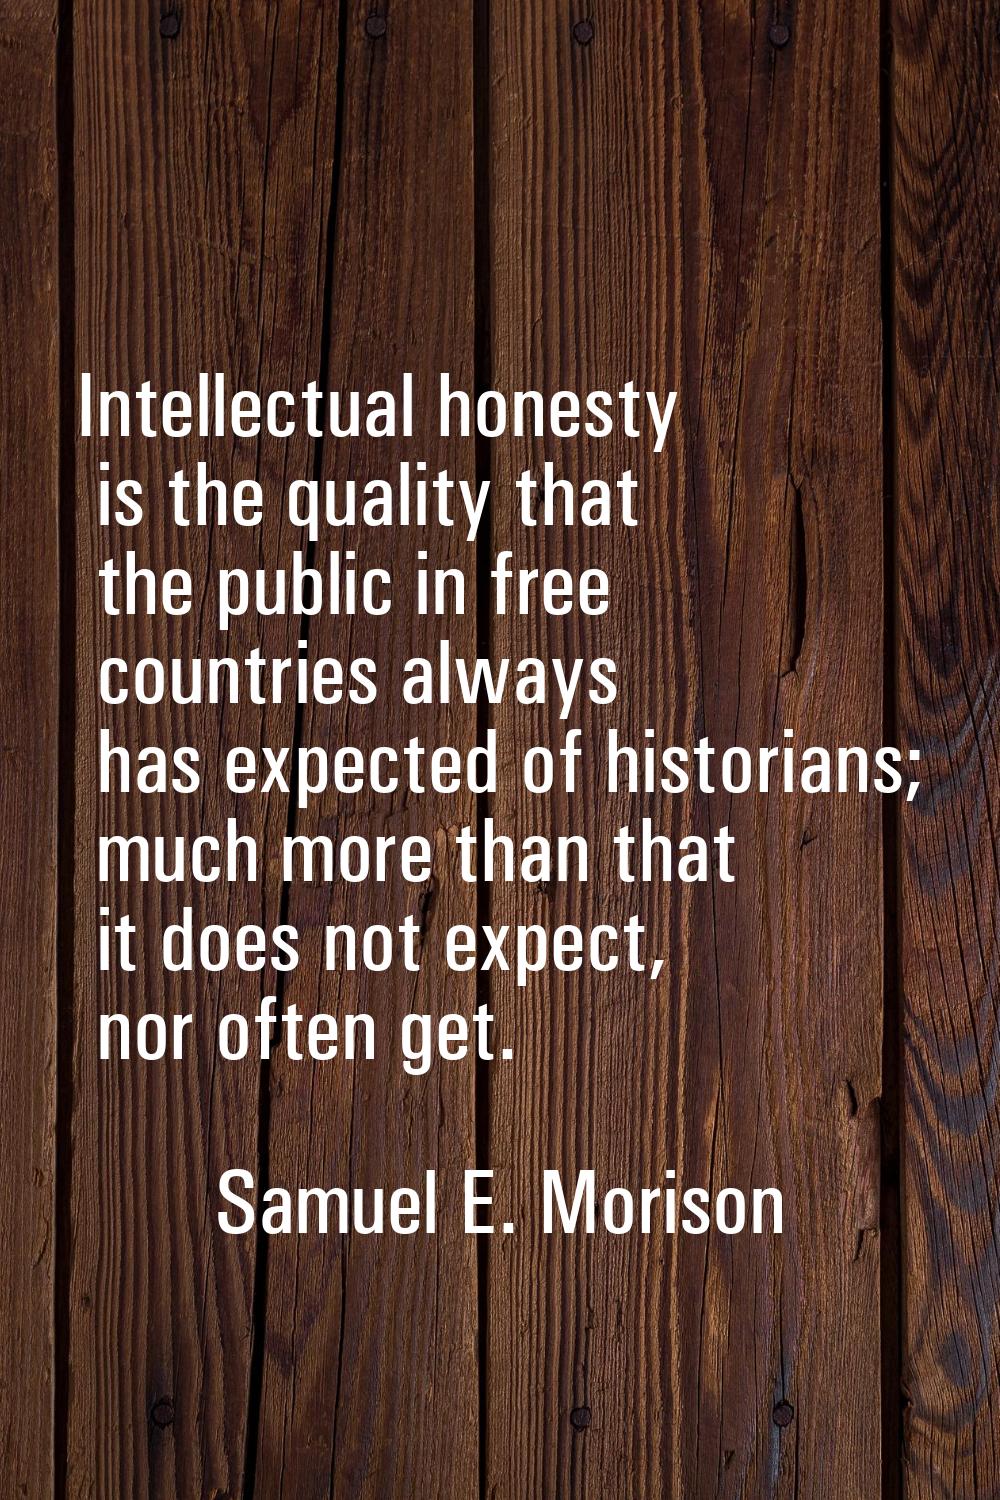 Intellectual honesty is the quality that the public in free countries always has expected of histor